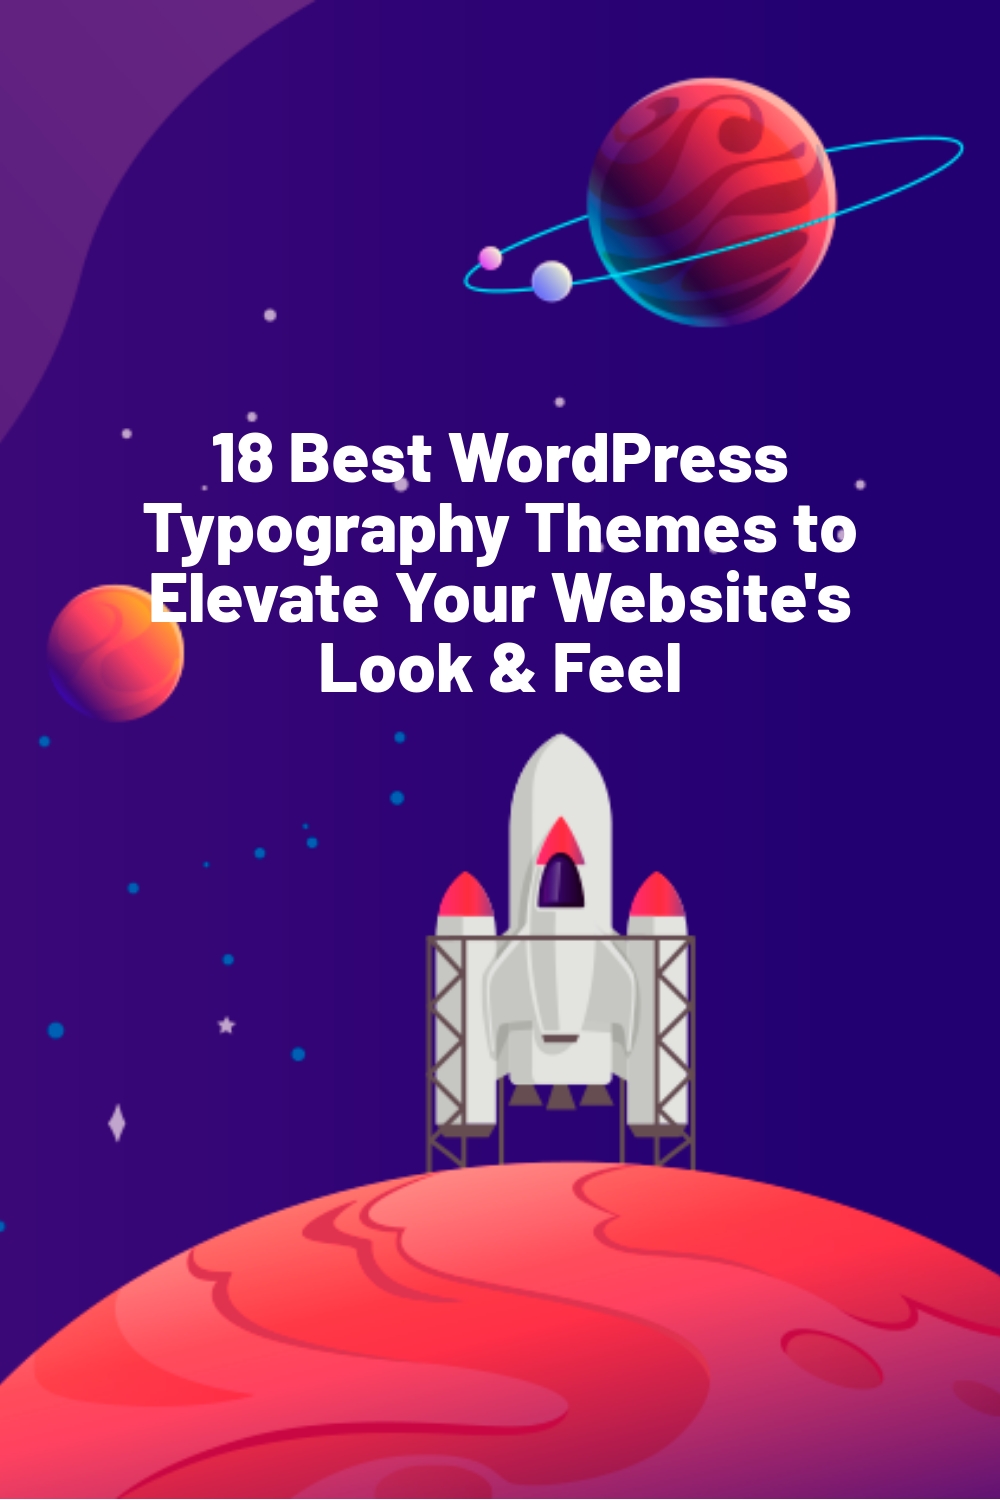 18 Best WordPress Typography Themes to Elevate Your Website’s Look & Feel